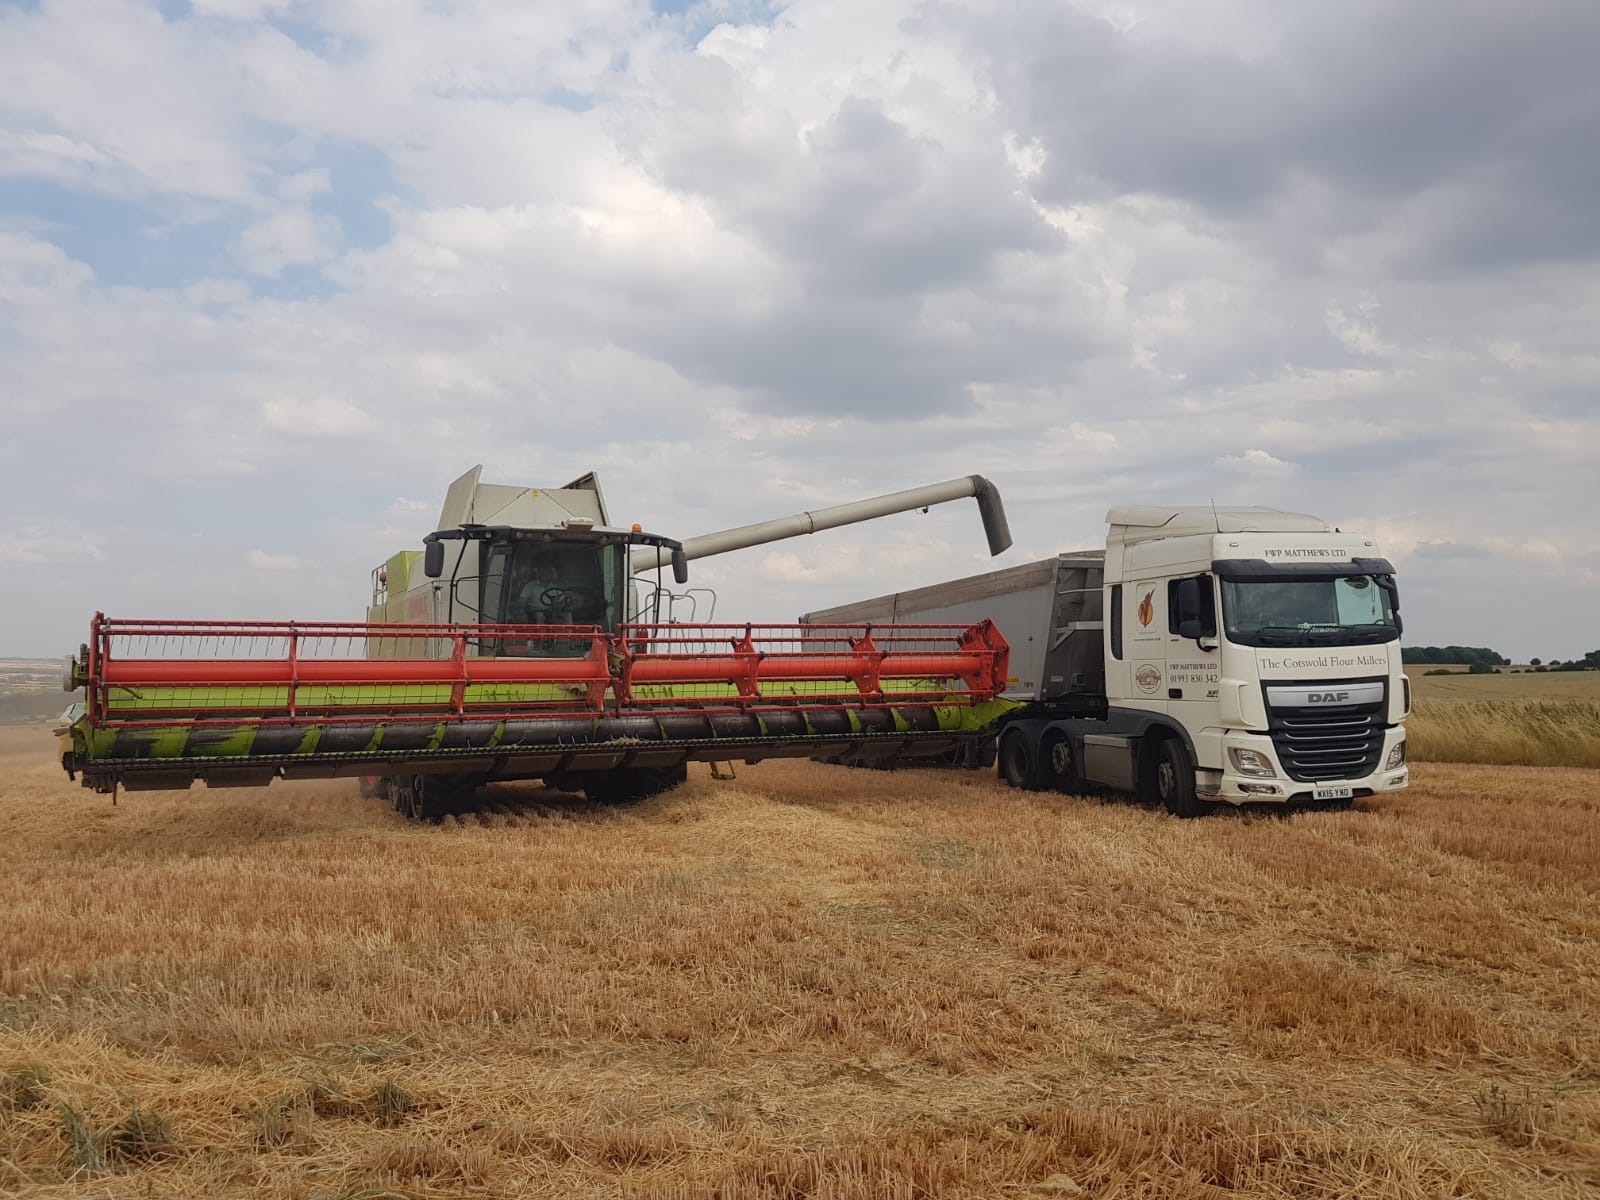 Loading grain into Matthews Cotswold Flour trailer from combine harvester